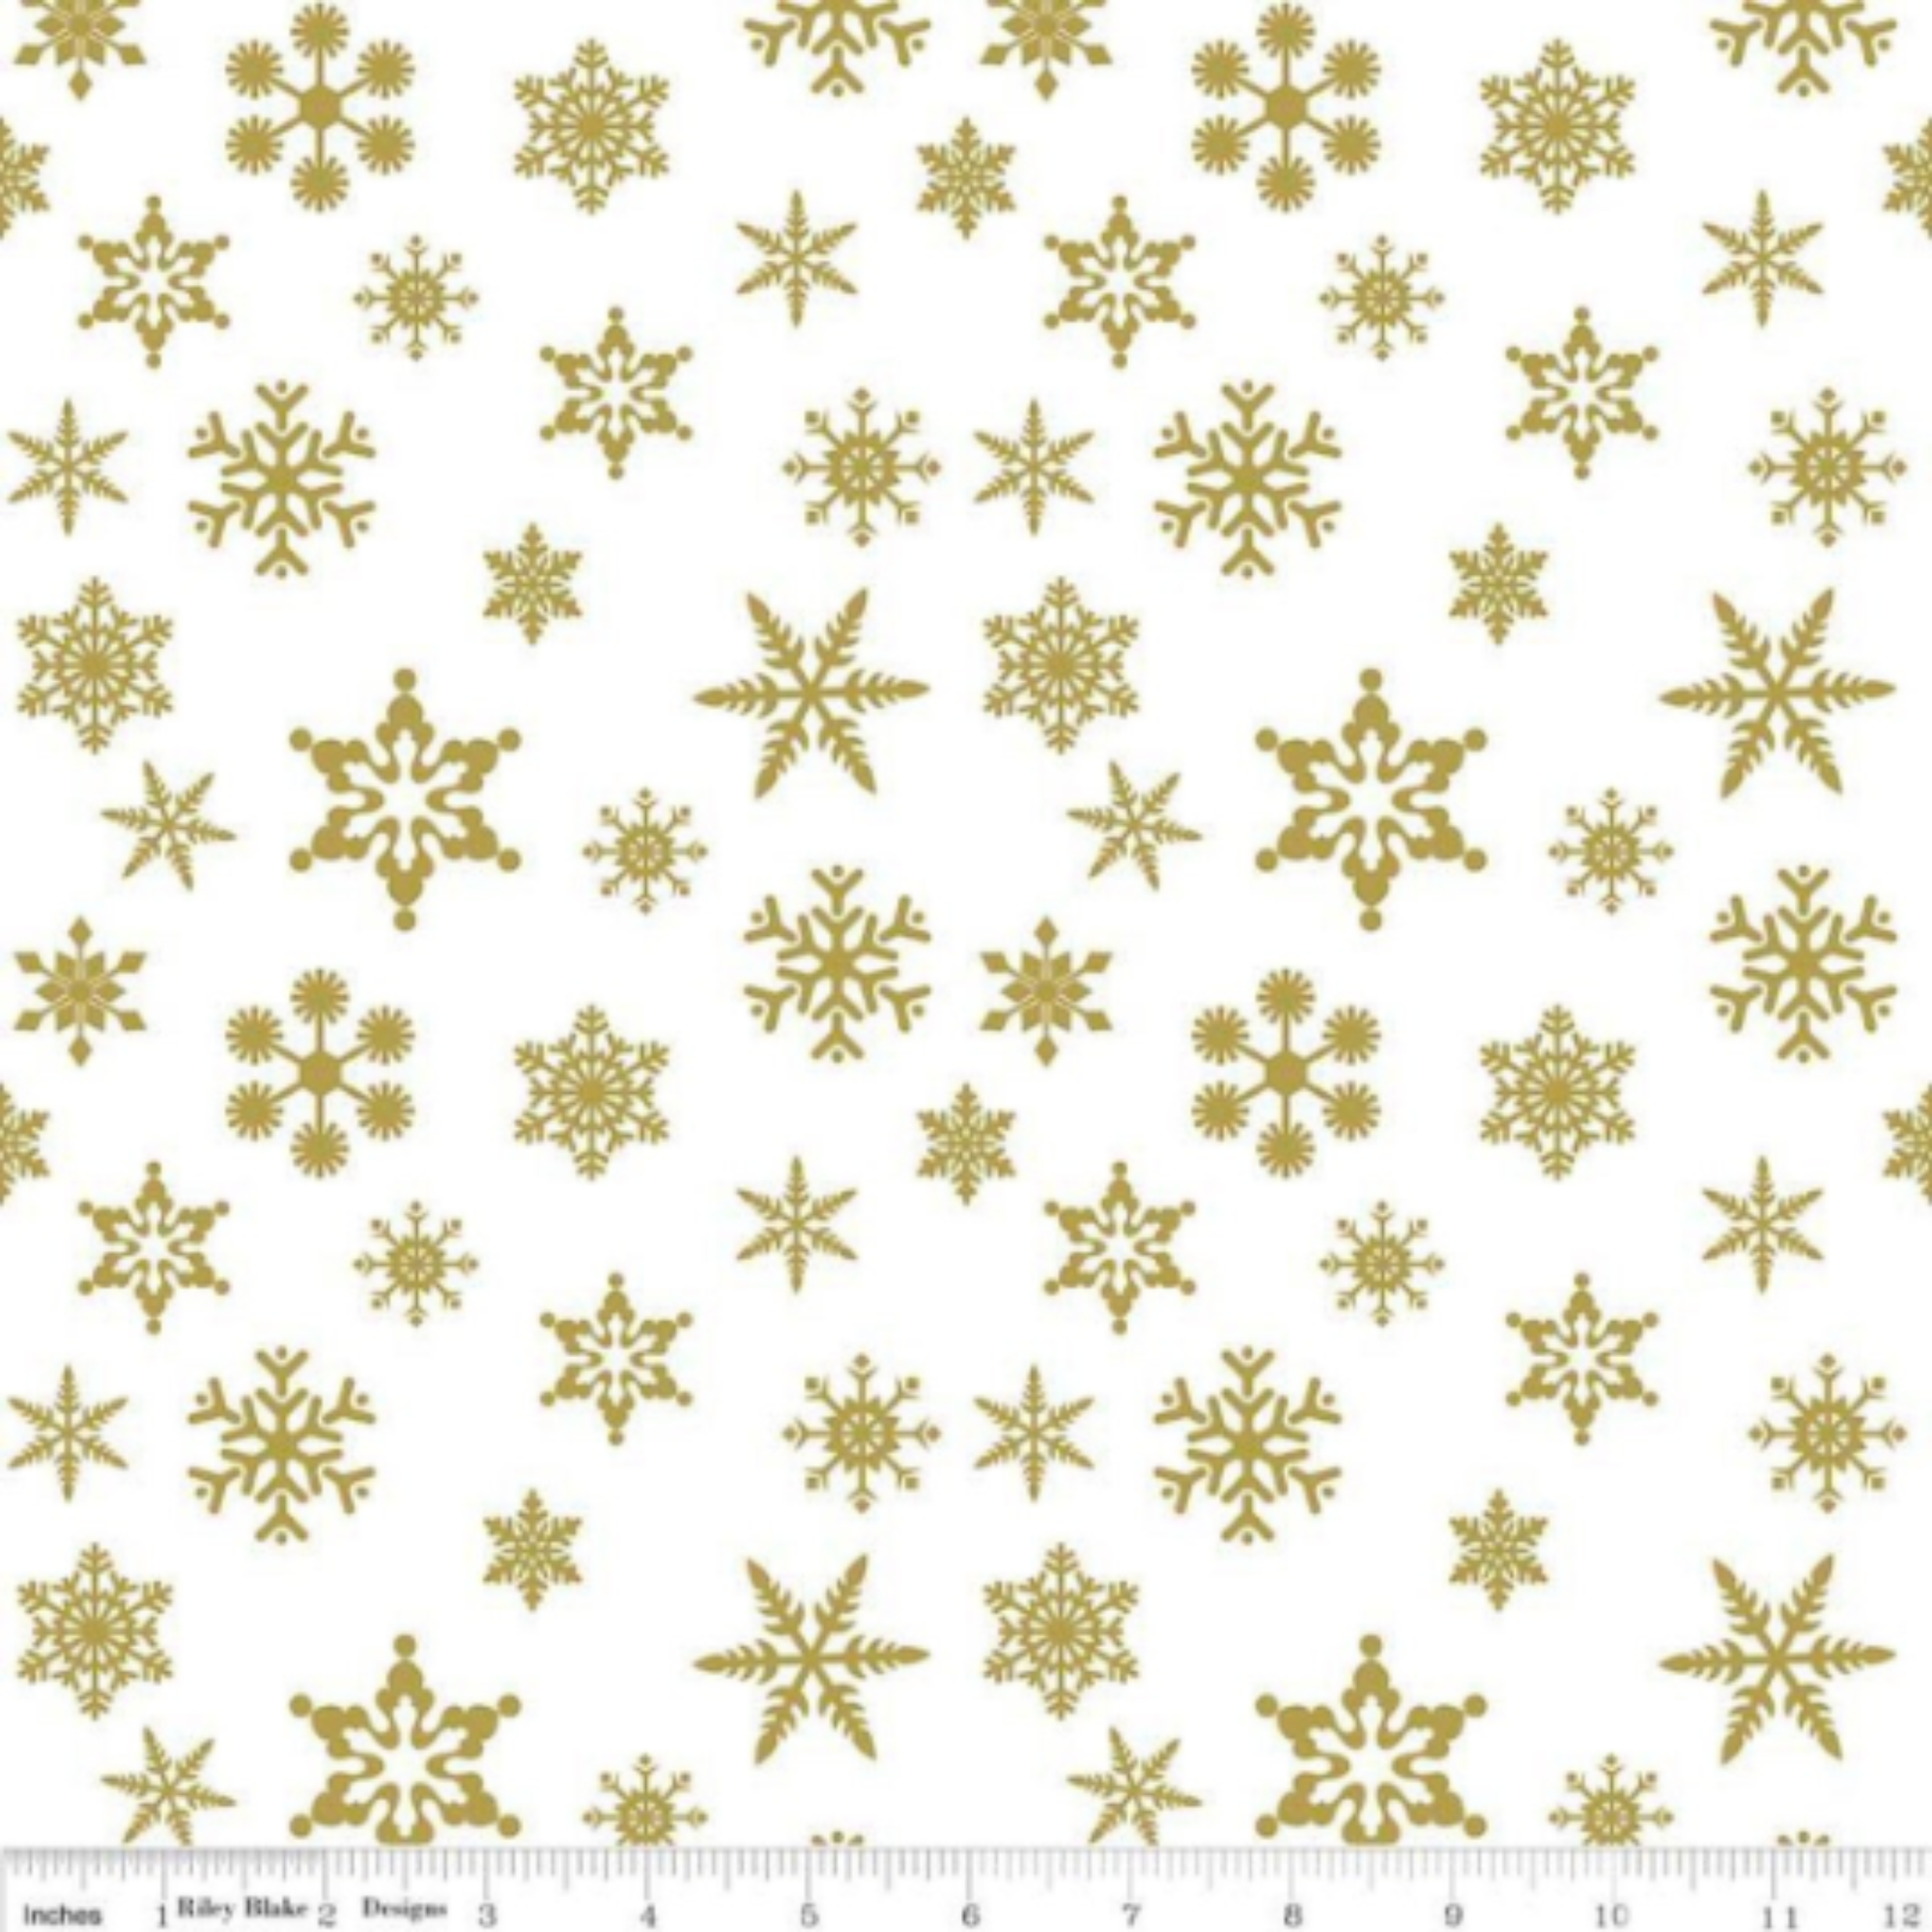 Angels Neverland Fabric 1 yard Snowflakes Green Jolly Penguin Fabric Bundle with coordinating fabrics also Sold By The Yard